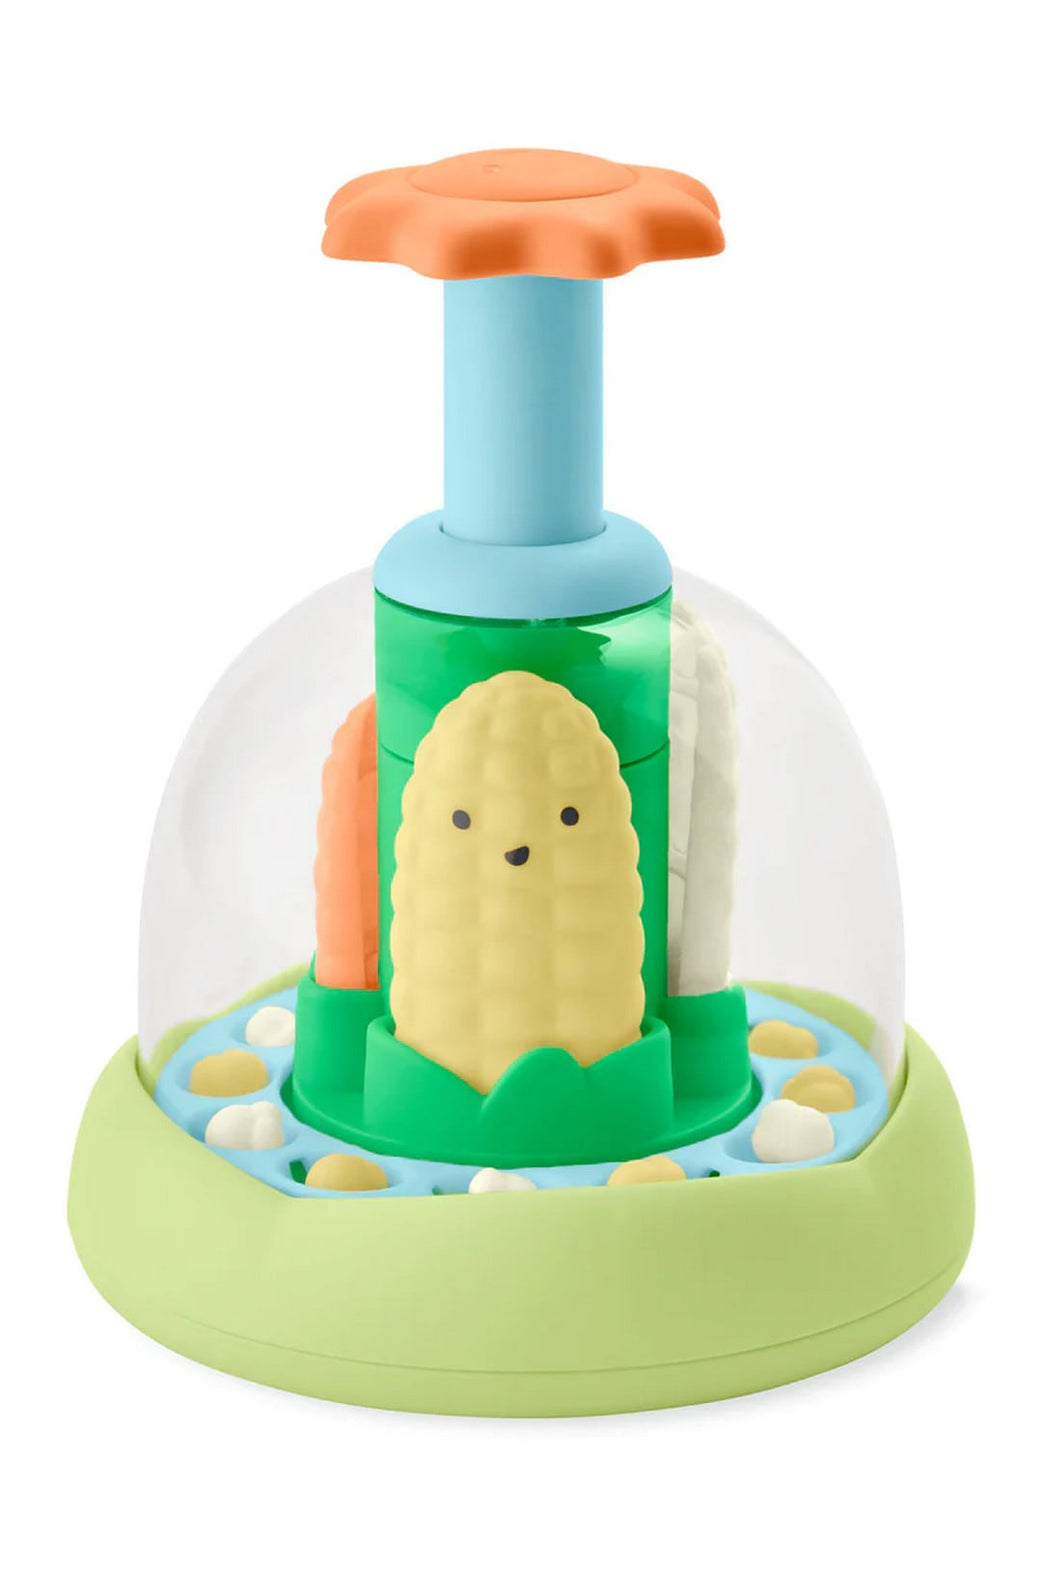 Skip Hop Farmstand Push & Spin Baby Toy 1